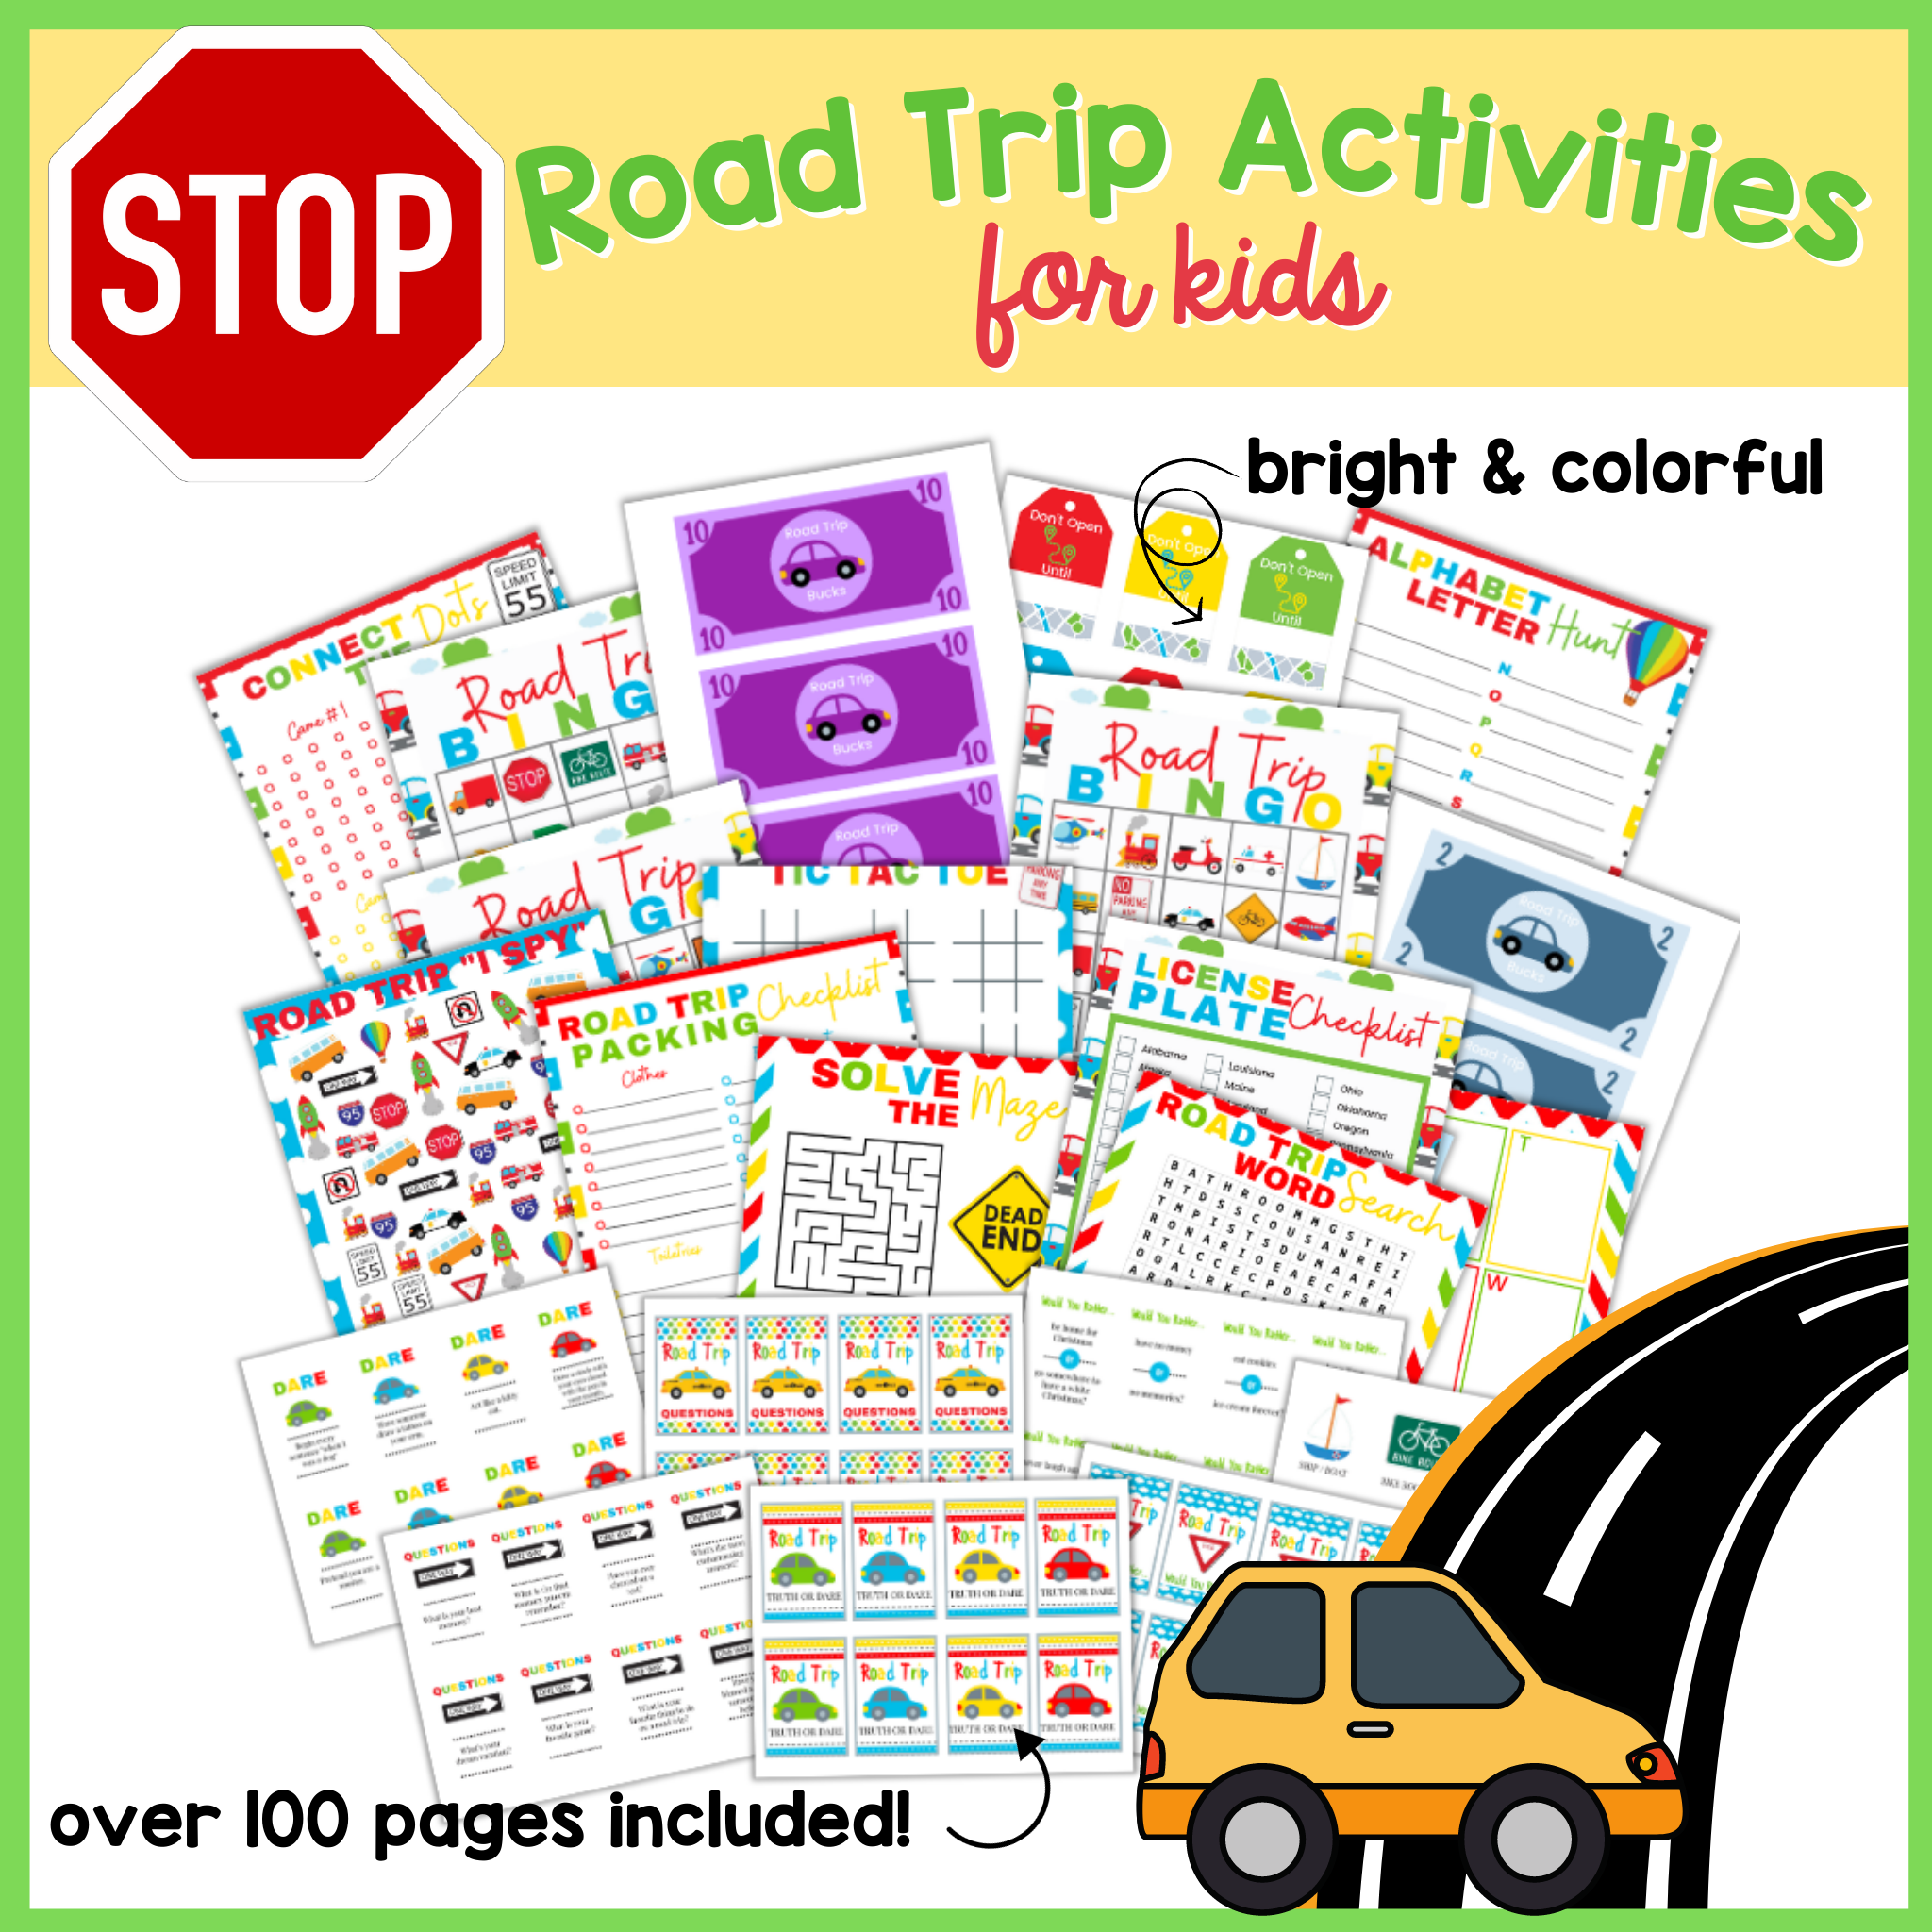 15 + Road Trip Activities Over 75 Pages of Fun! – MicheleTripple